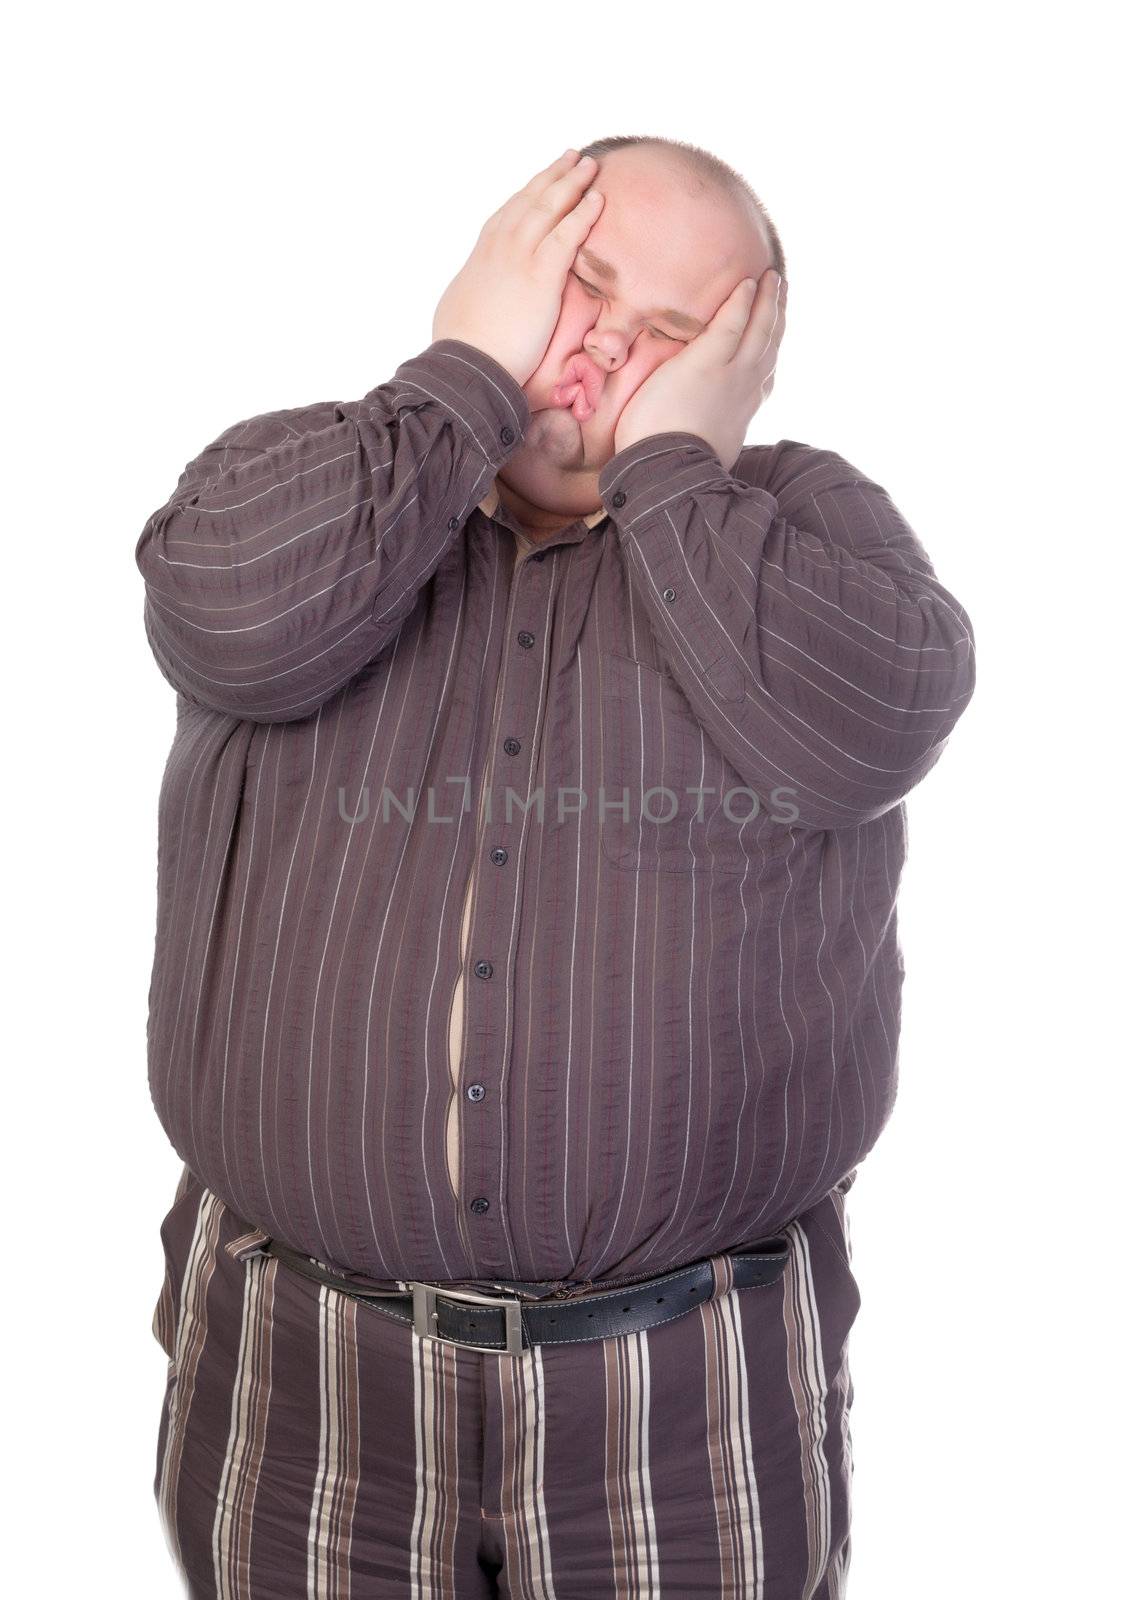 Obese man squashing his face by Discovod